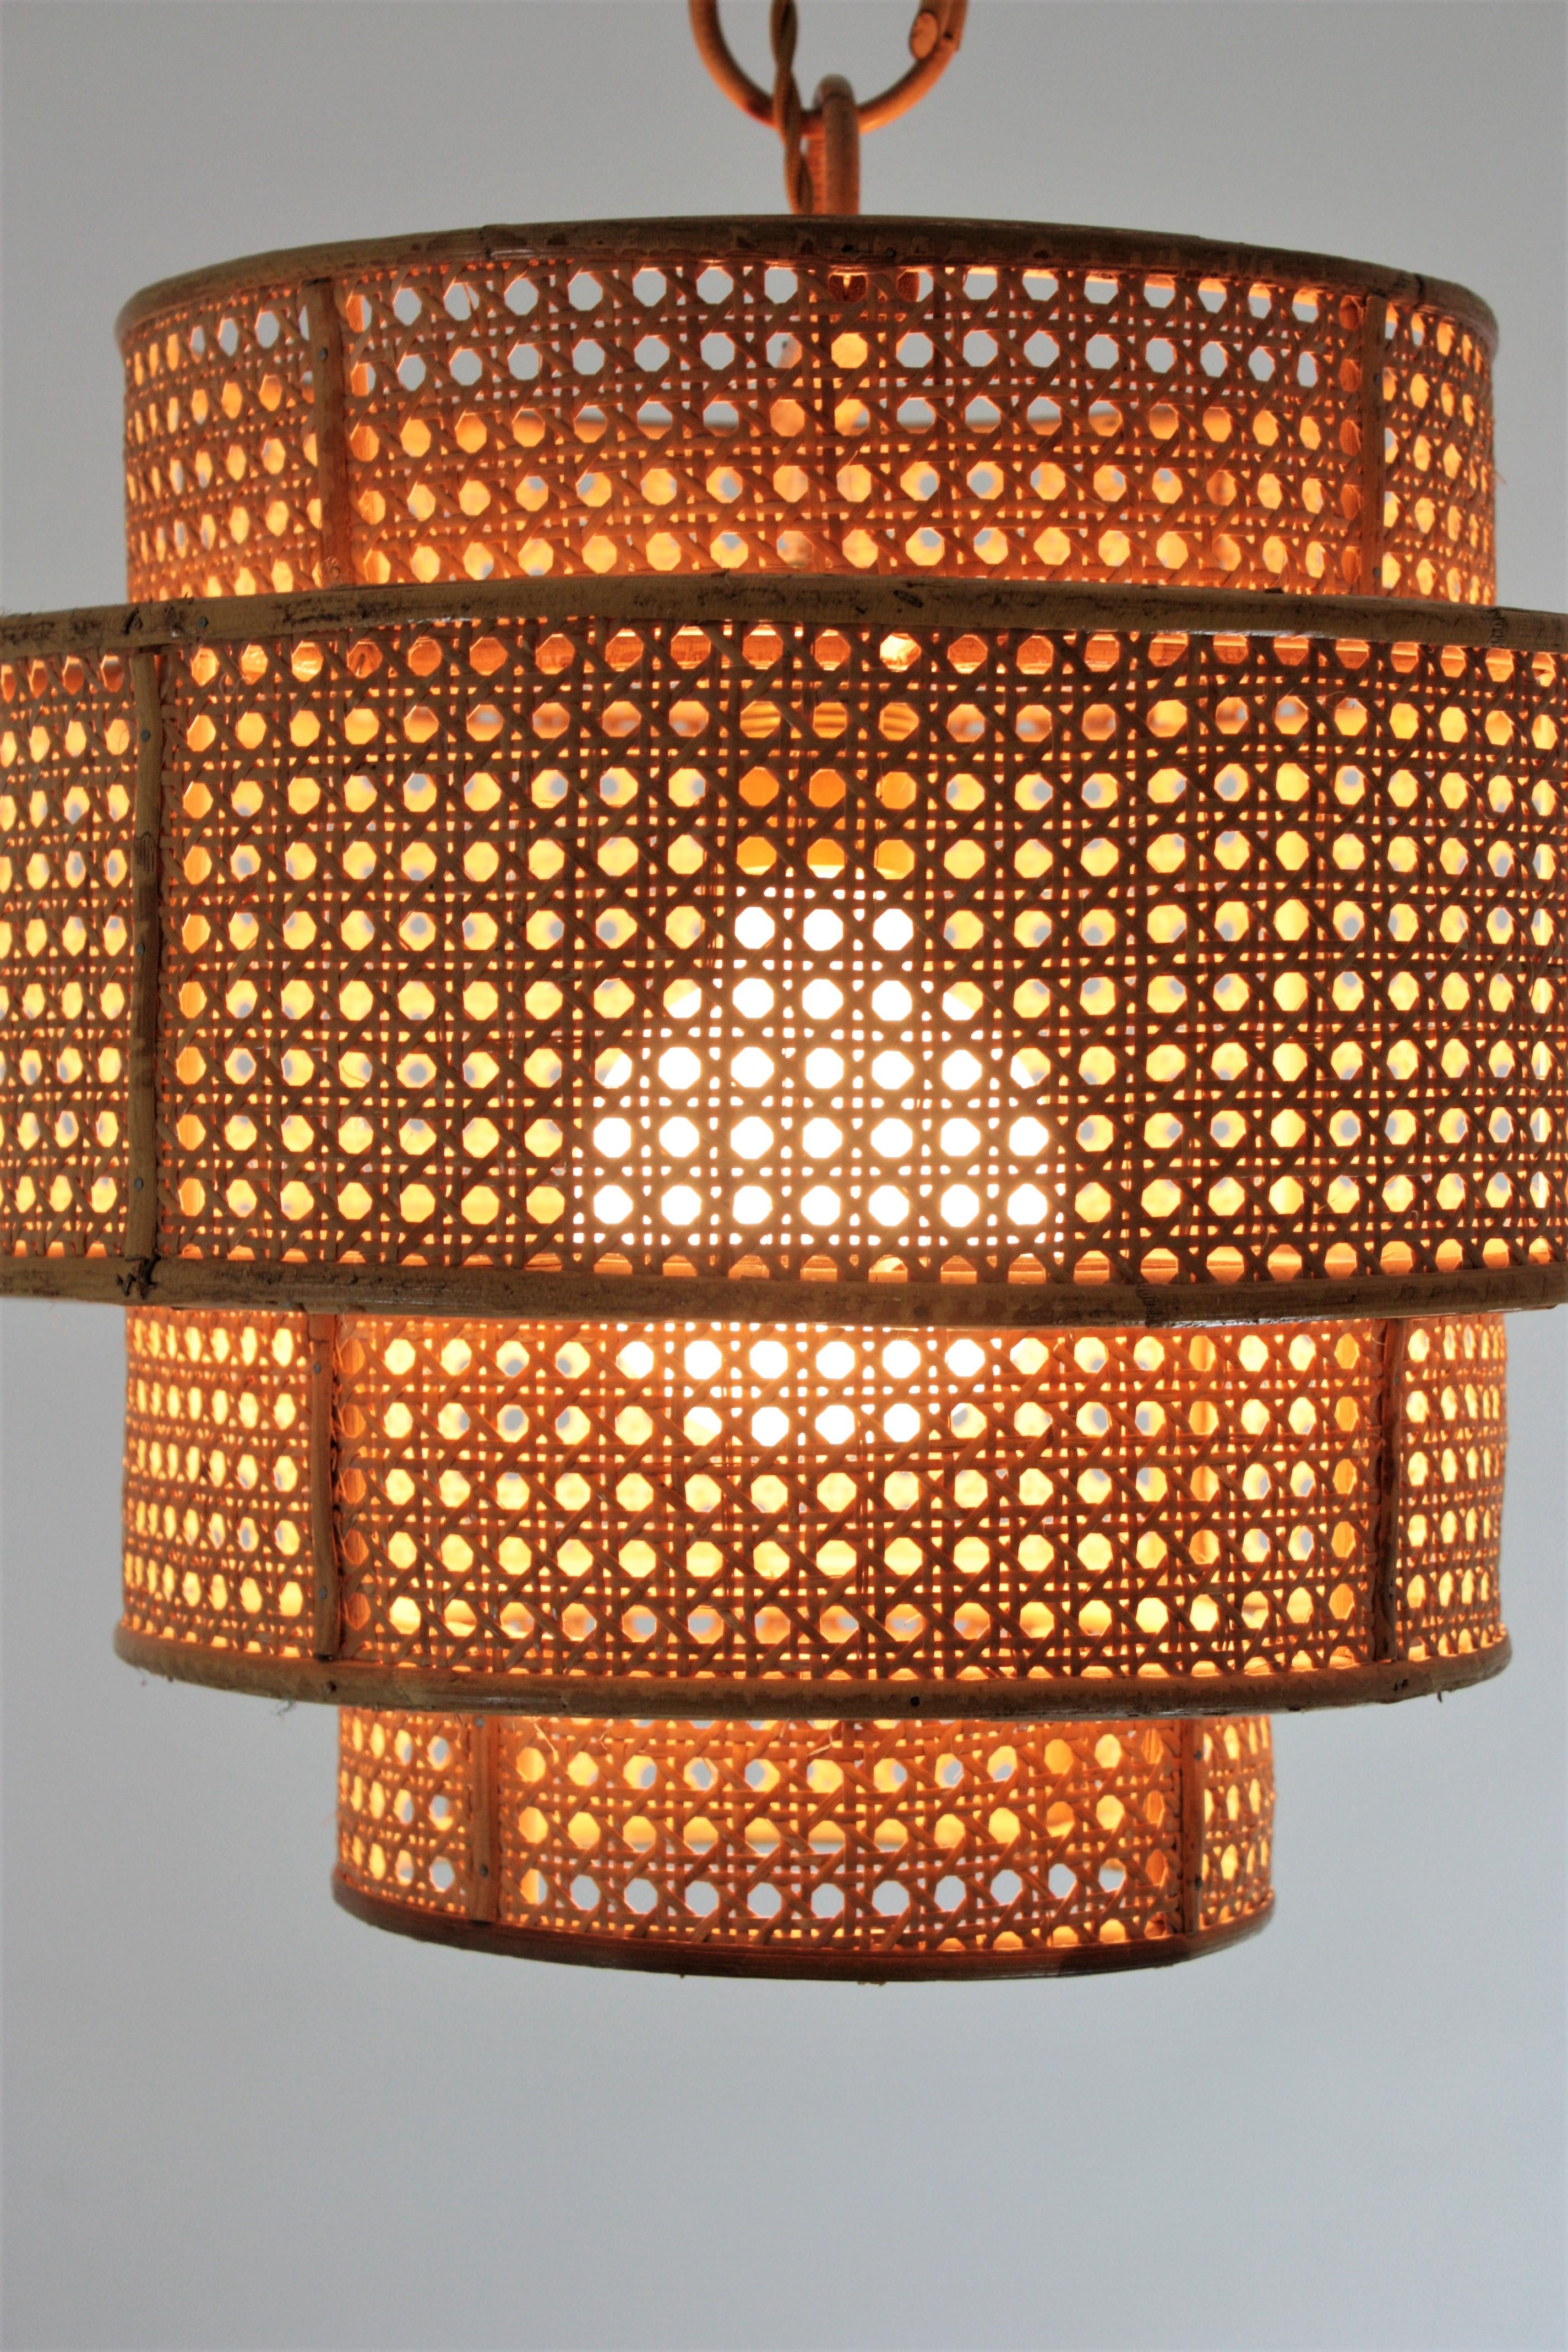  Rattan Wicker Weave Concentric Cylinder Pendant Hanging Light  For Sale 4